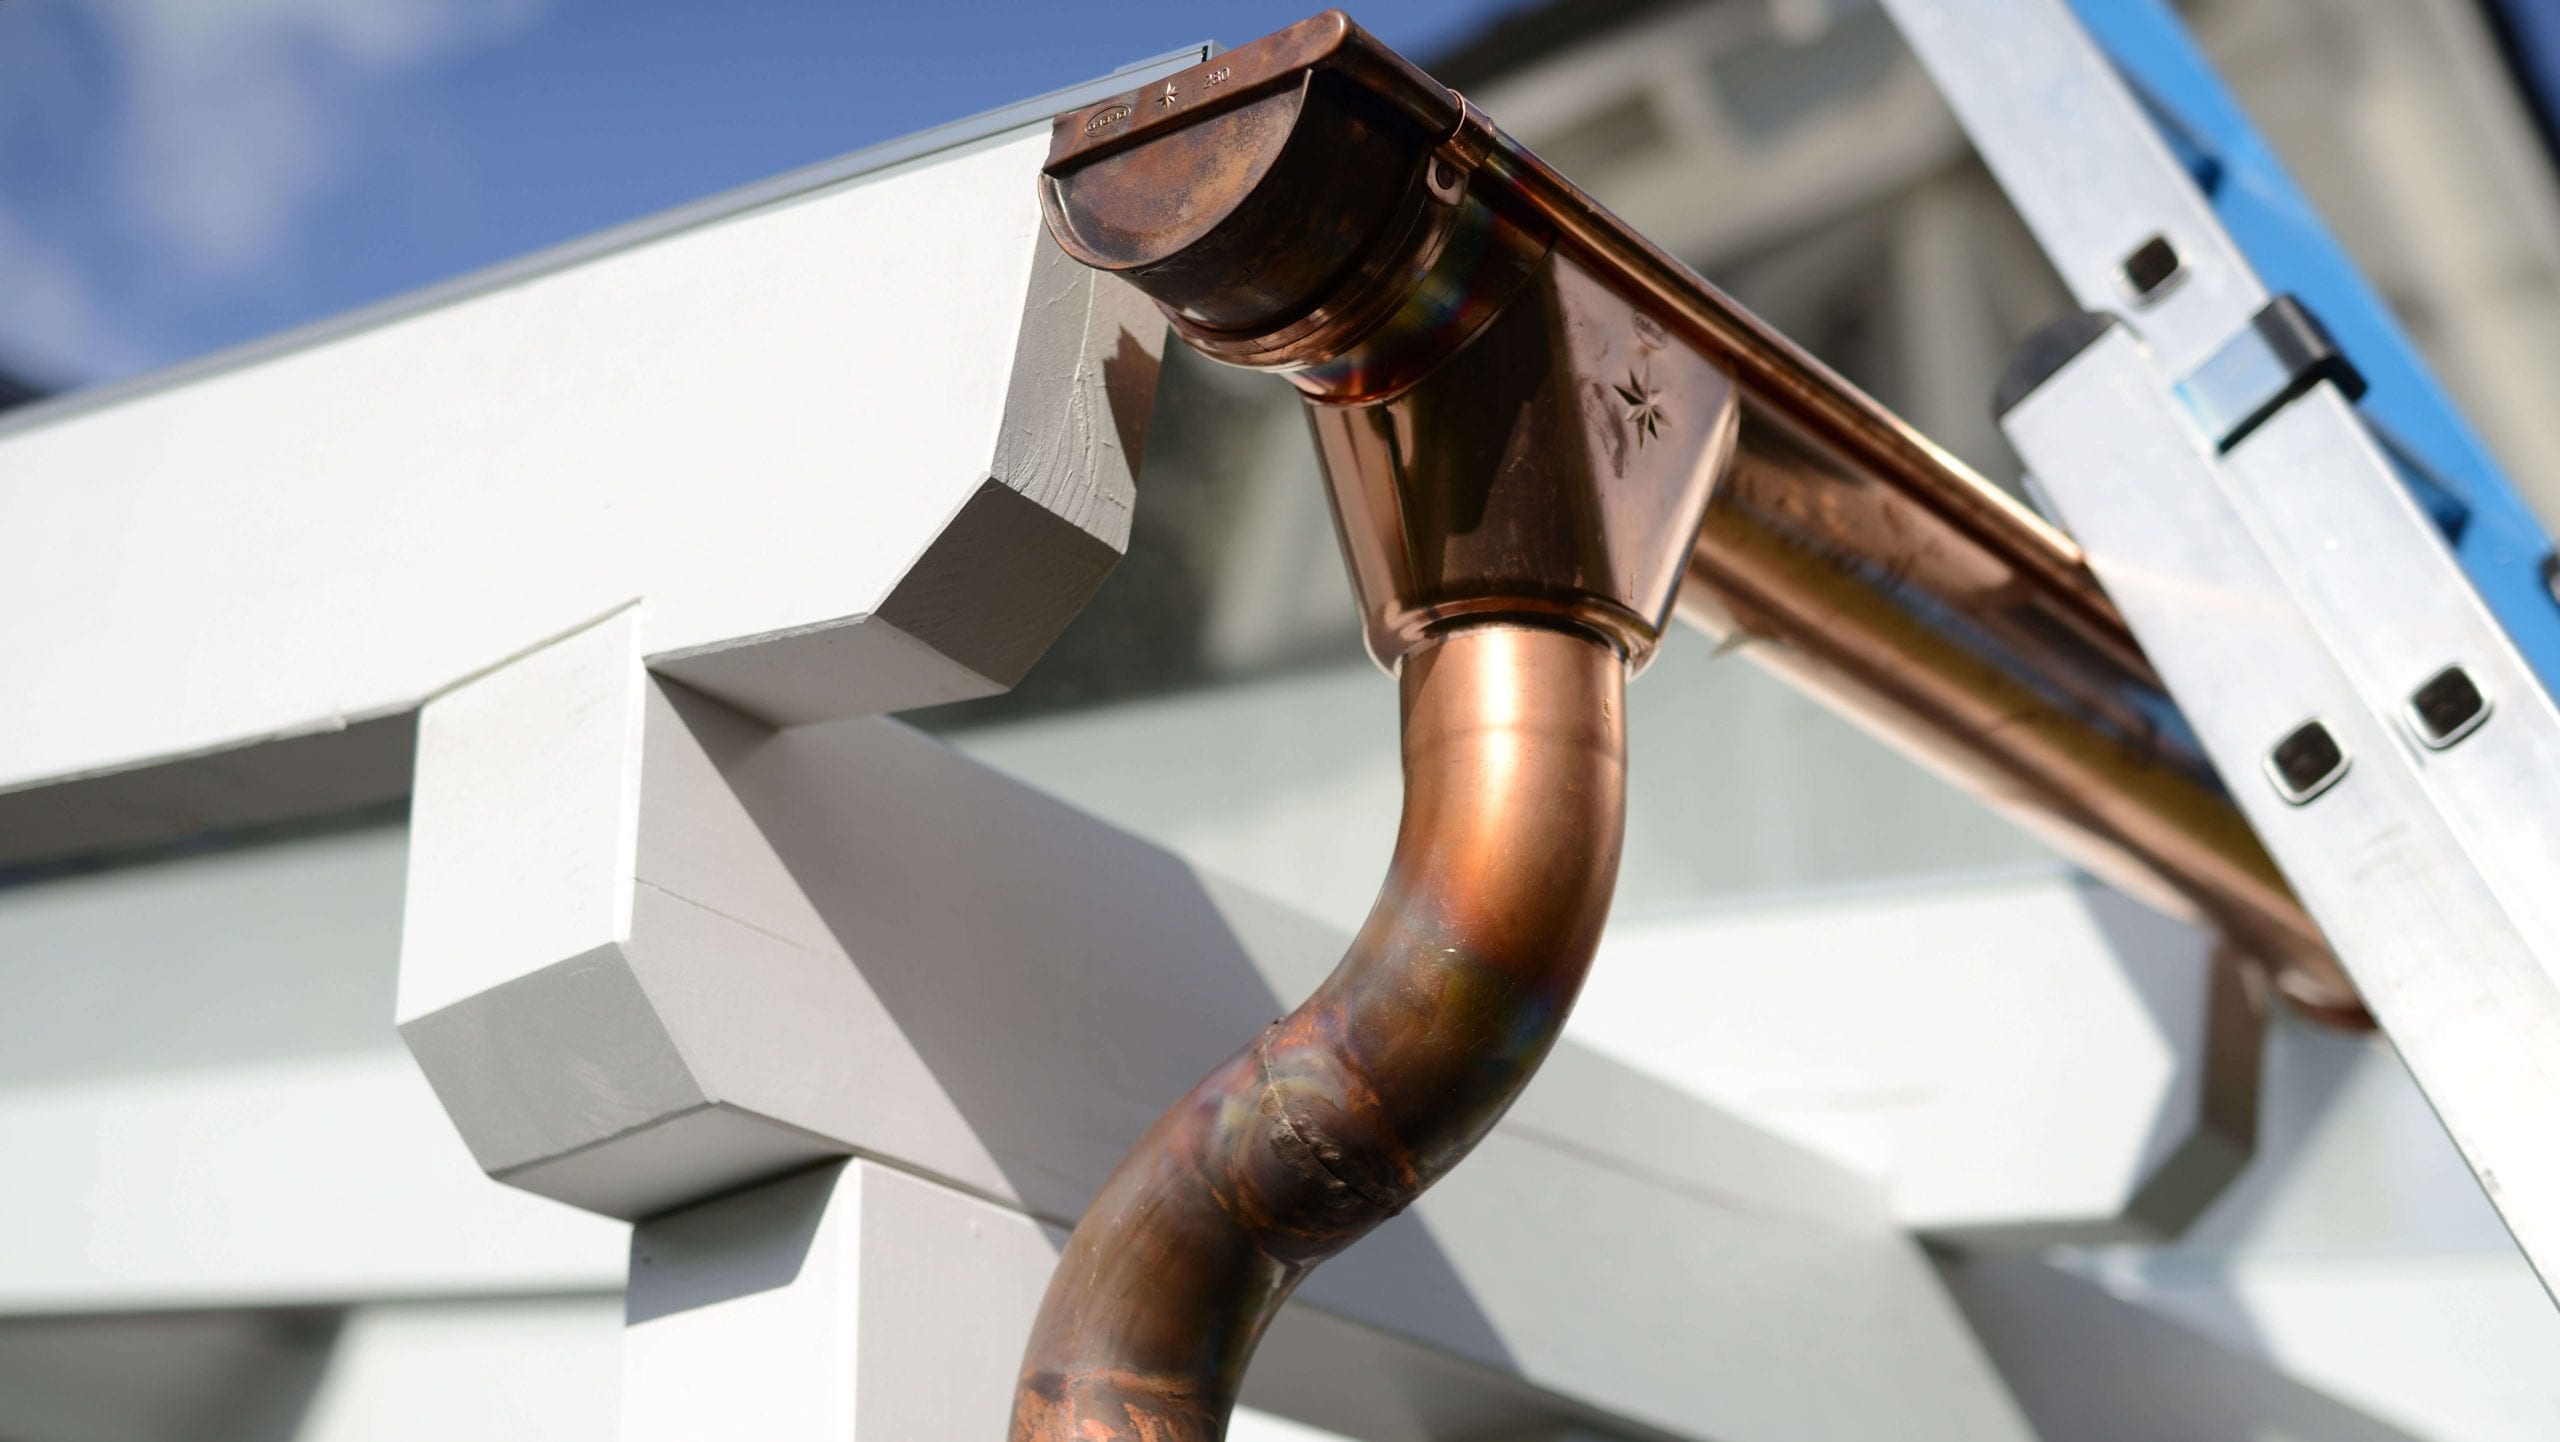 Make your property stand out with copper gutters. Contact for gutter installation in Lafayette